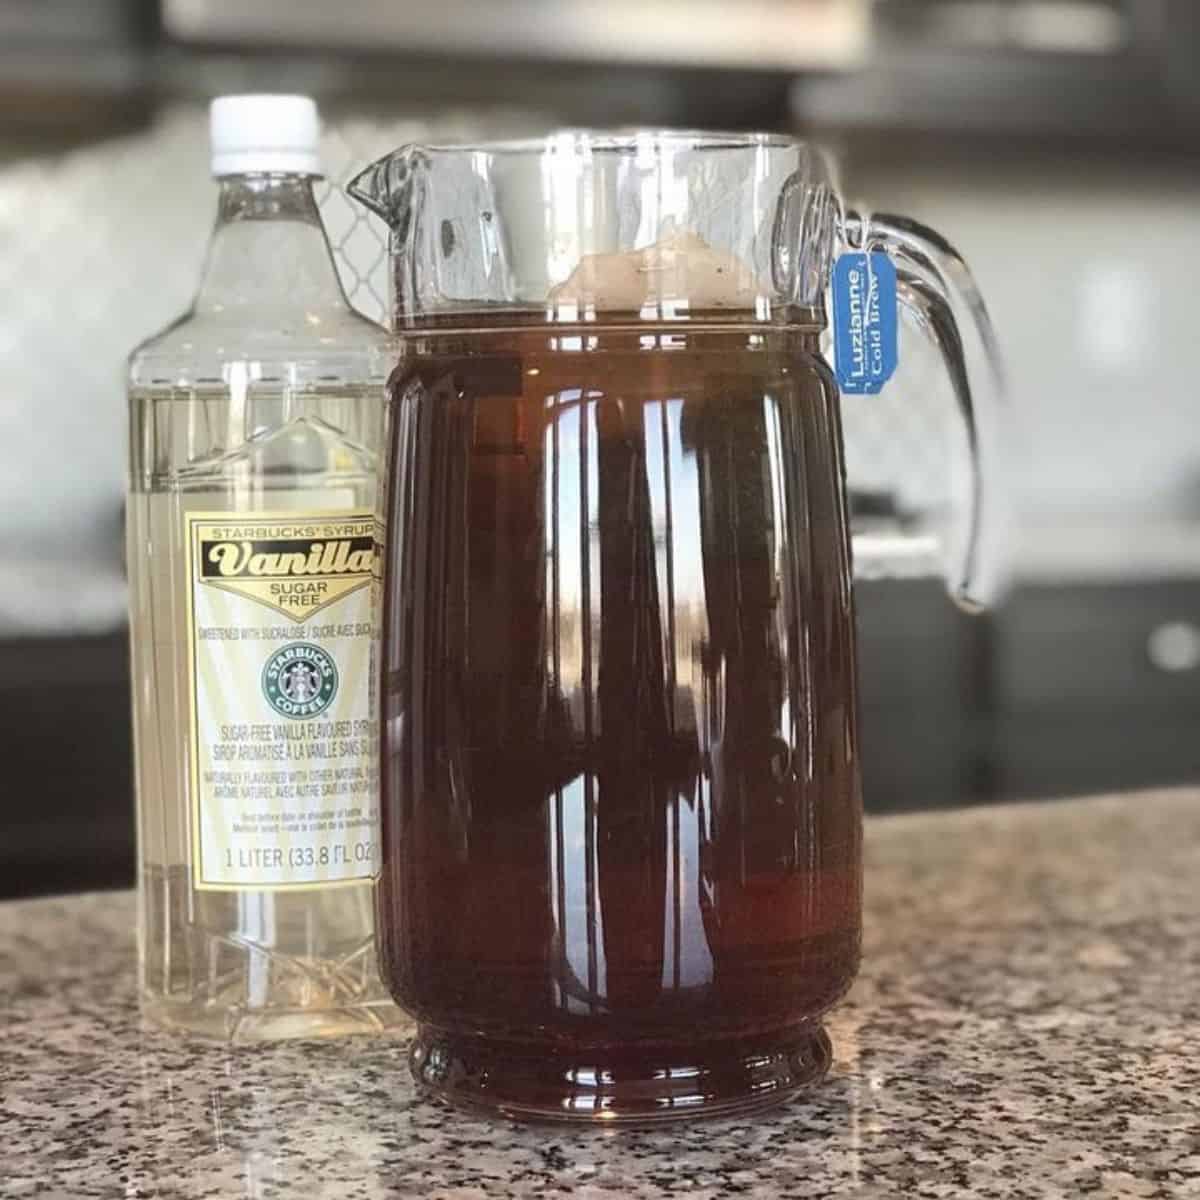 A bottle of natural sweetener and black iced tea